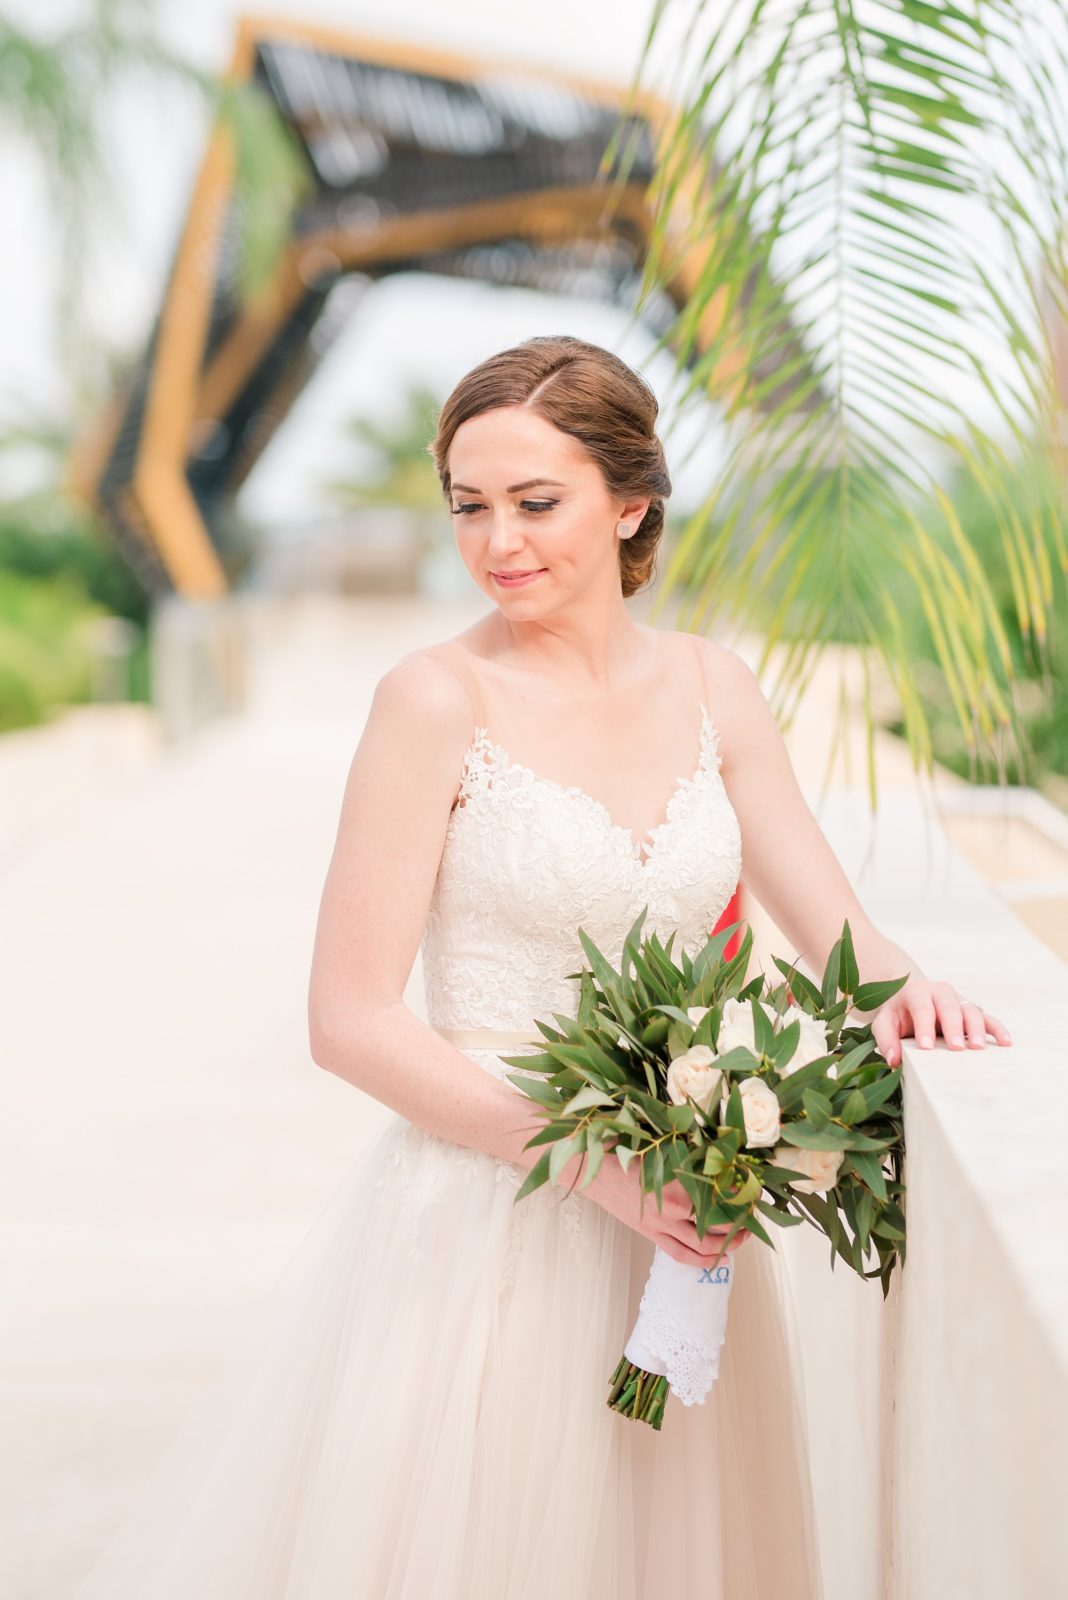 Lindsi and Luke's Destination Wedding in Cancun, Mexico